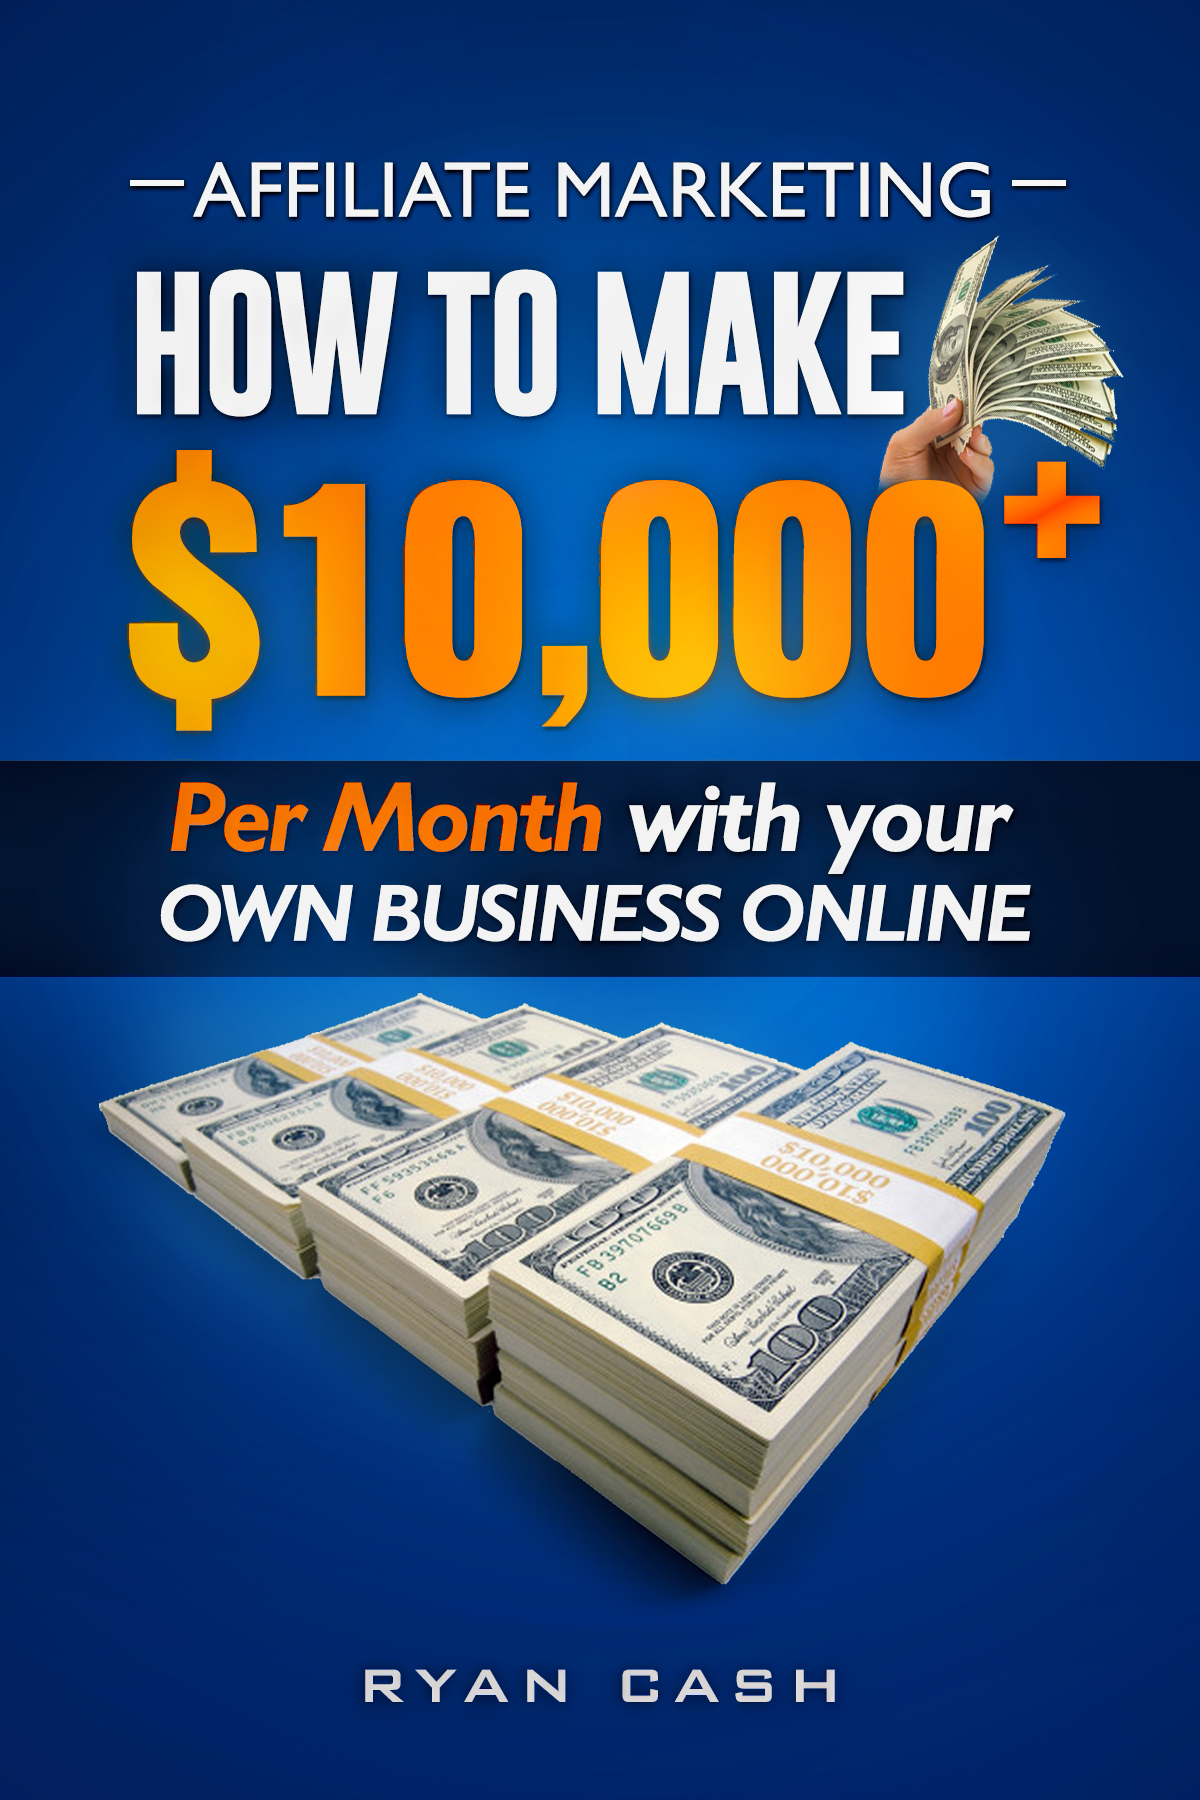 FREE: Affiliate Marketing: How to Make $10,000+ Per Month With Your Own Online Business by Ryan Cash